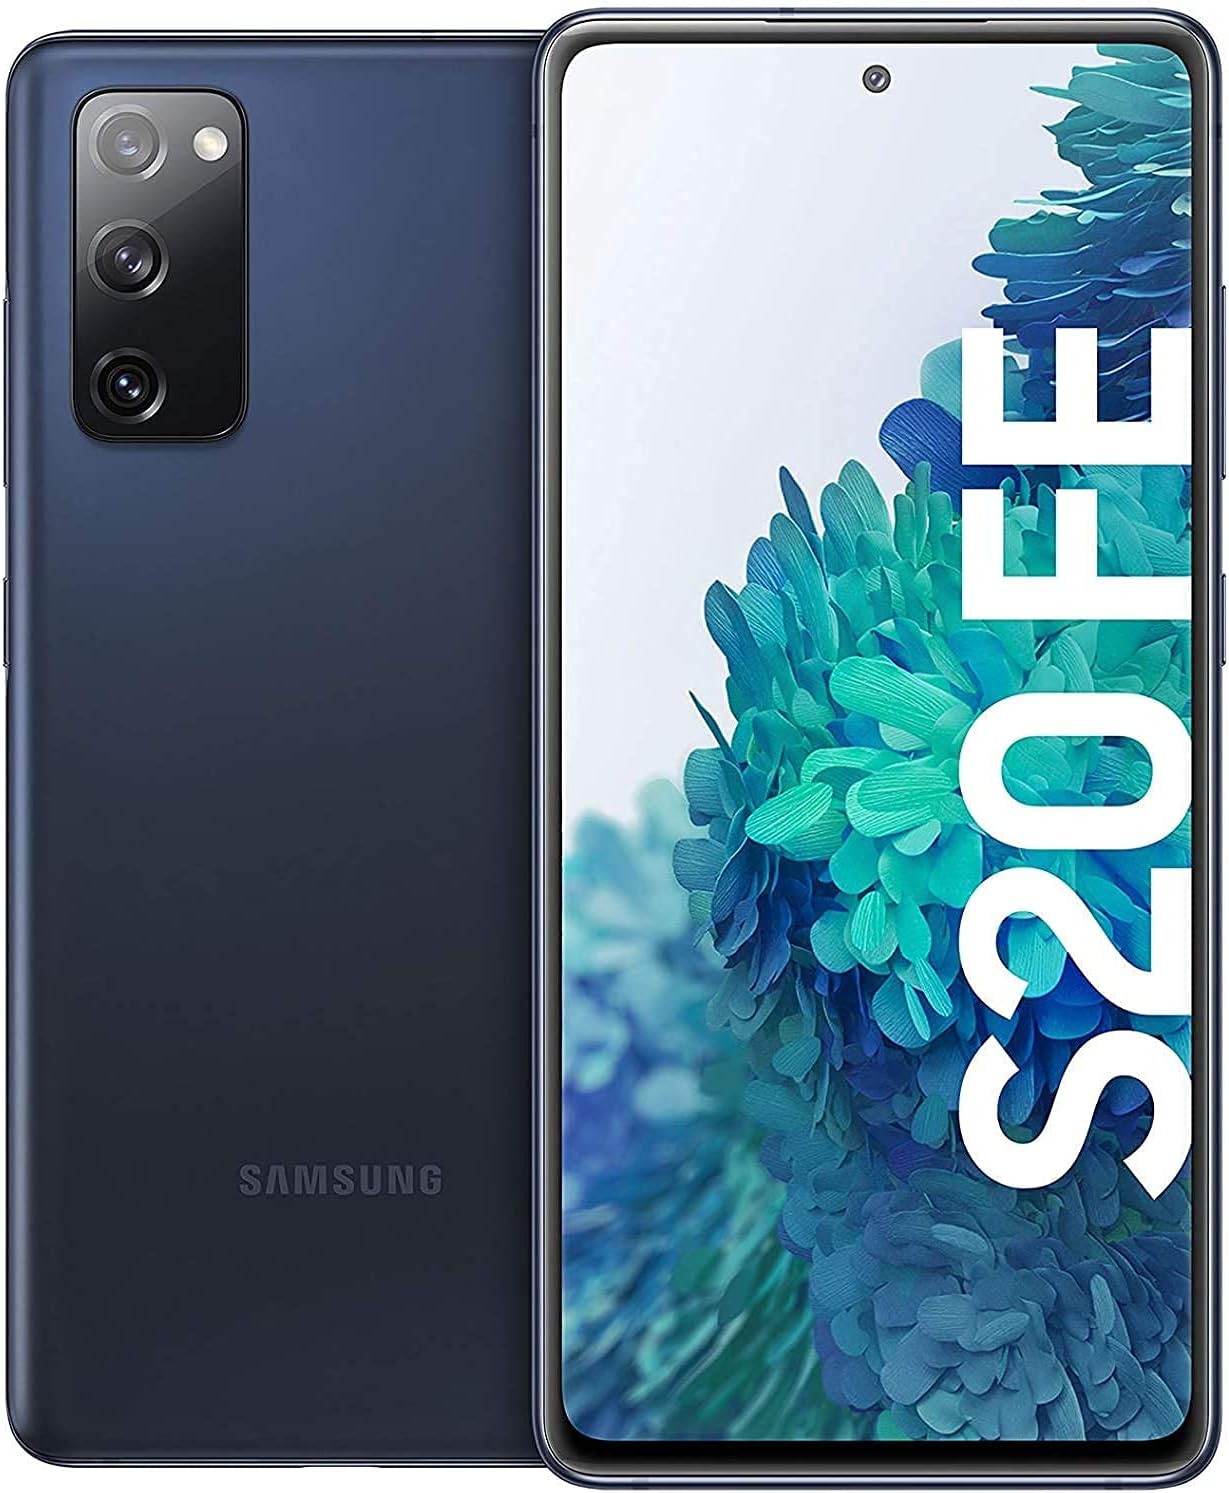 Samsung Galaxy S20 FE, Android SIM Free Smartphone, 6.5 Inch Super AMOLED Display, 4500 mAh Battery, 128 GB/6 GB RAM, Smartphone in Cloud Navy - Amazing Gadgets Outlet